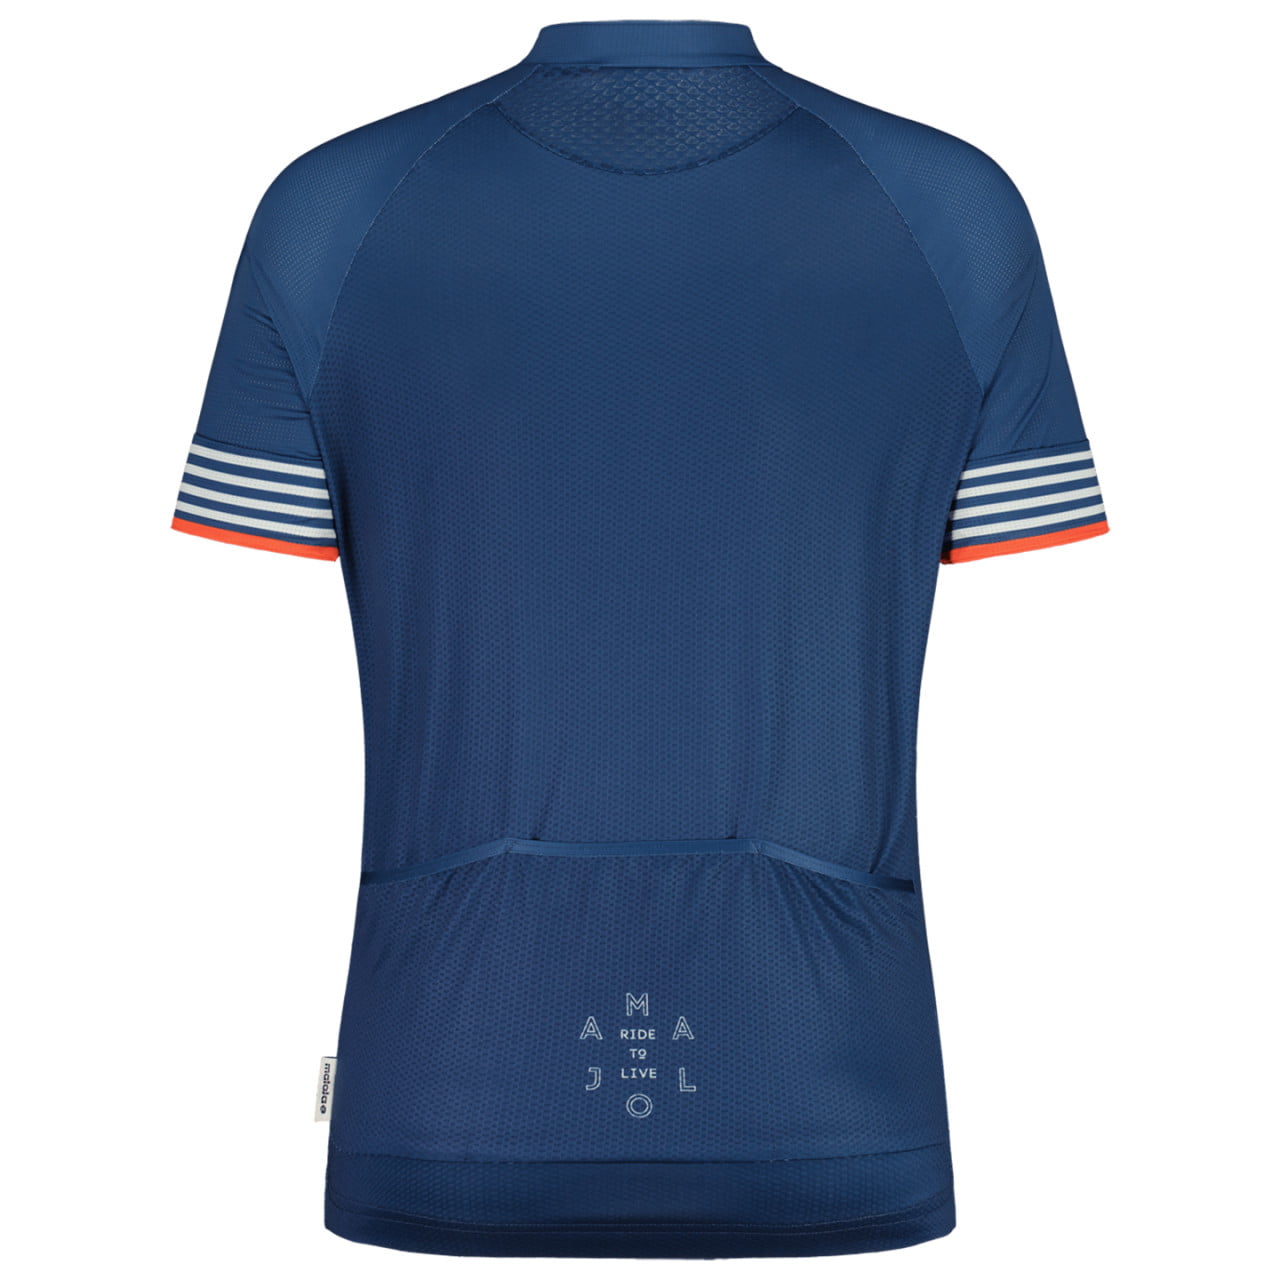 Maillot manches courtes TeseroM.